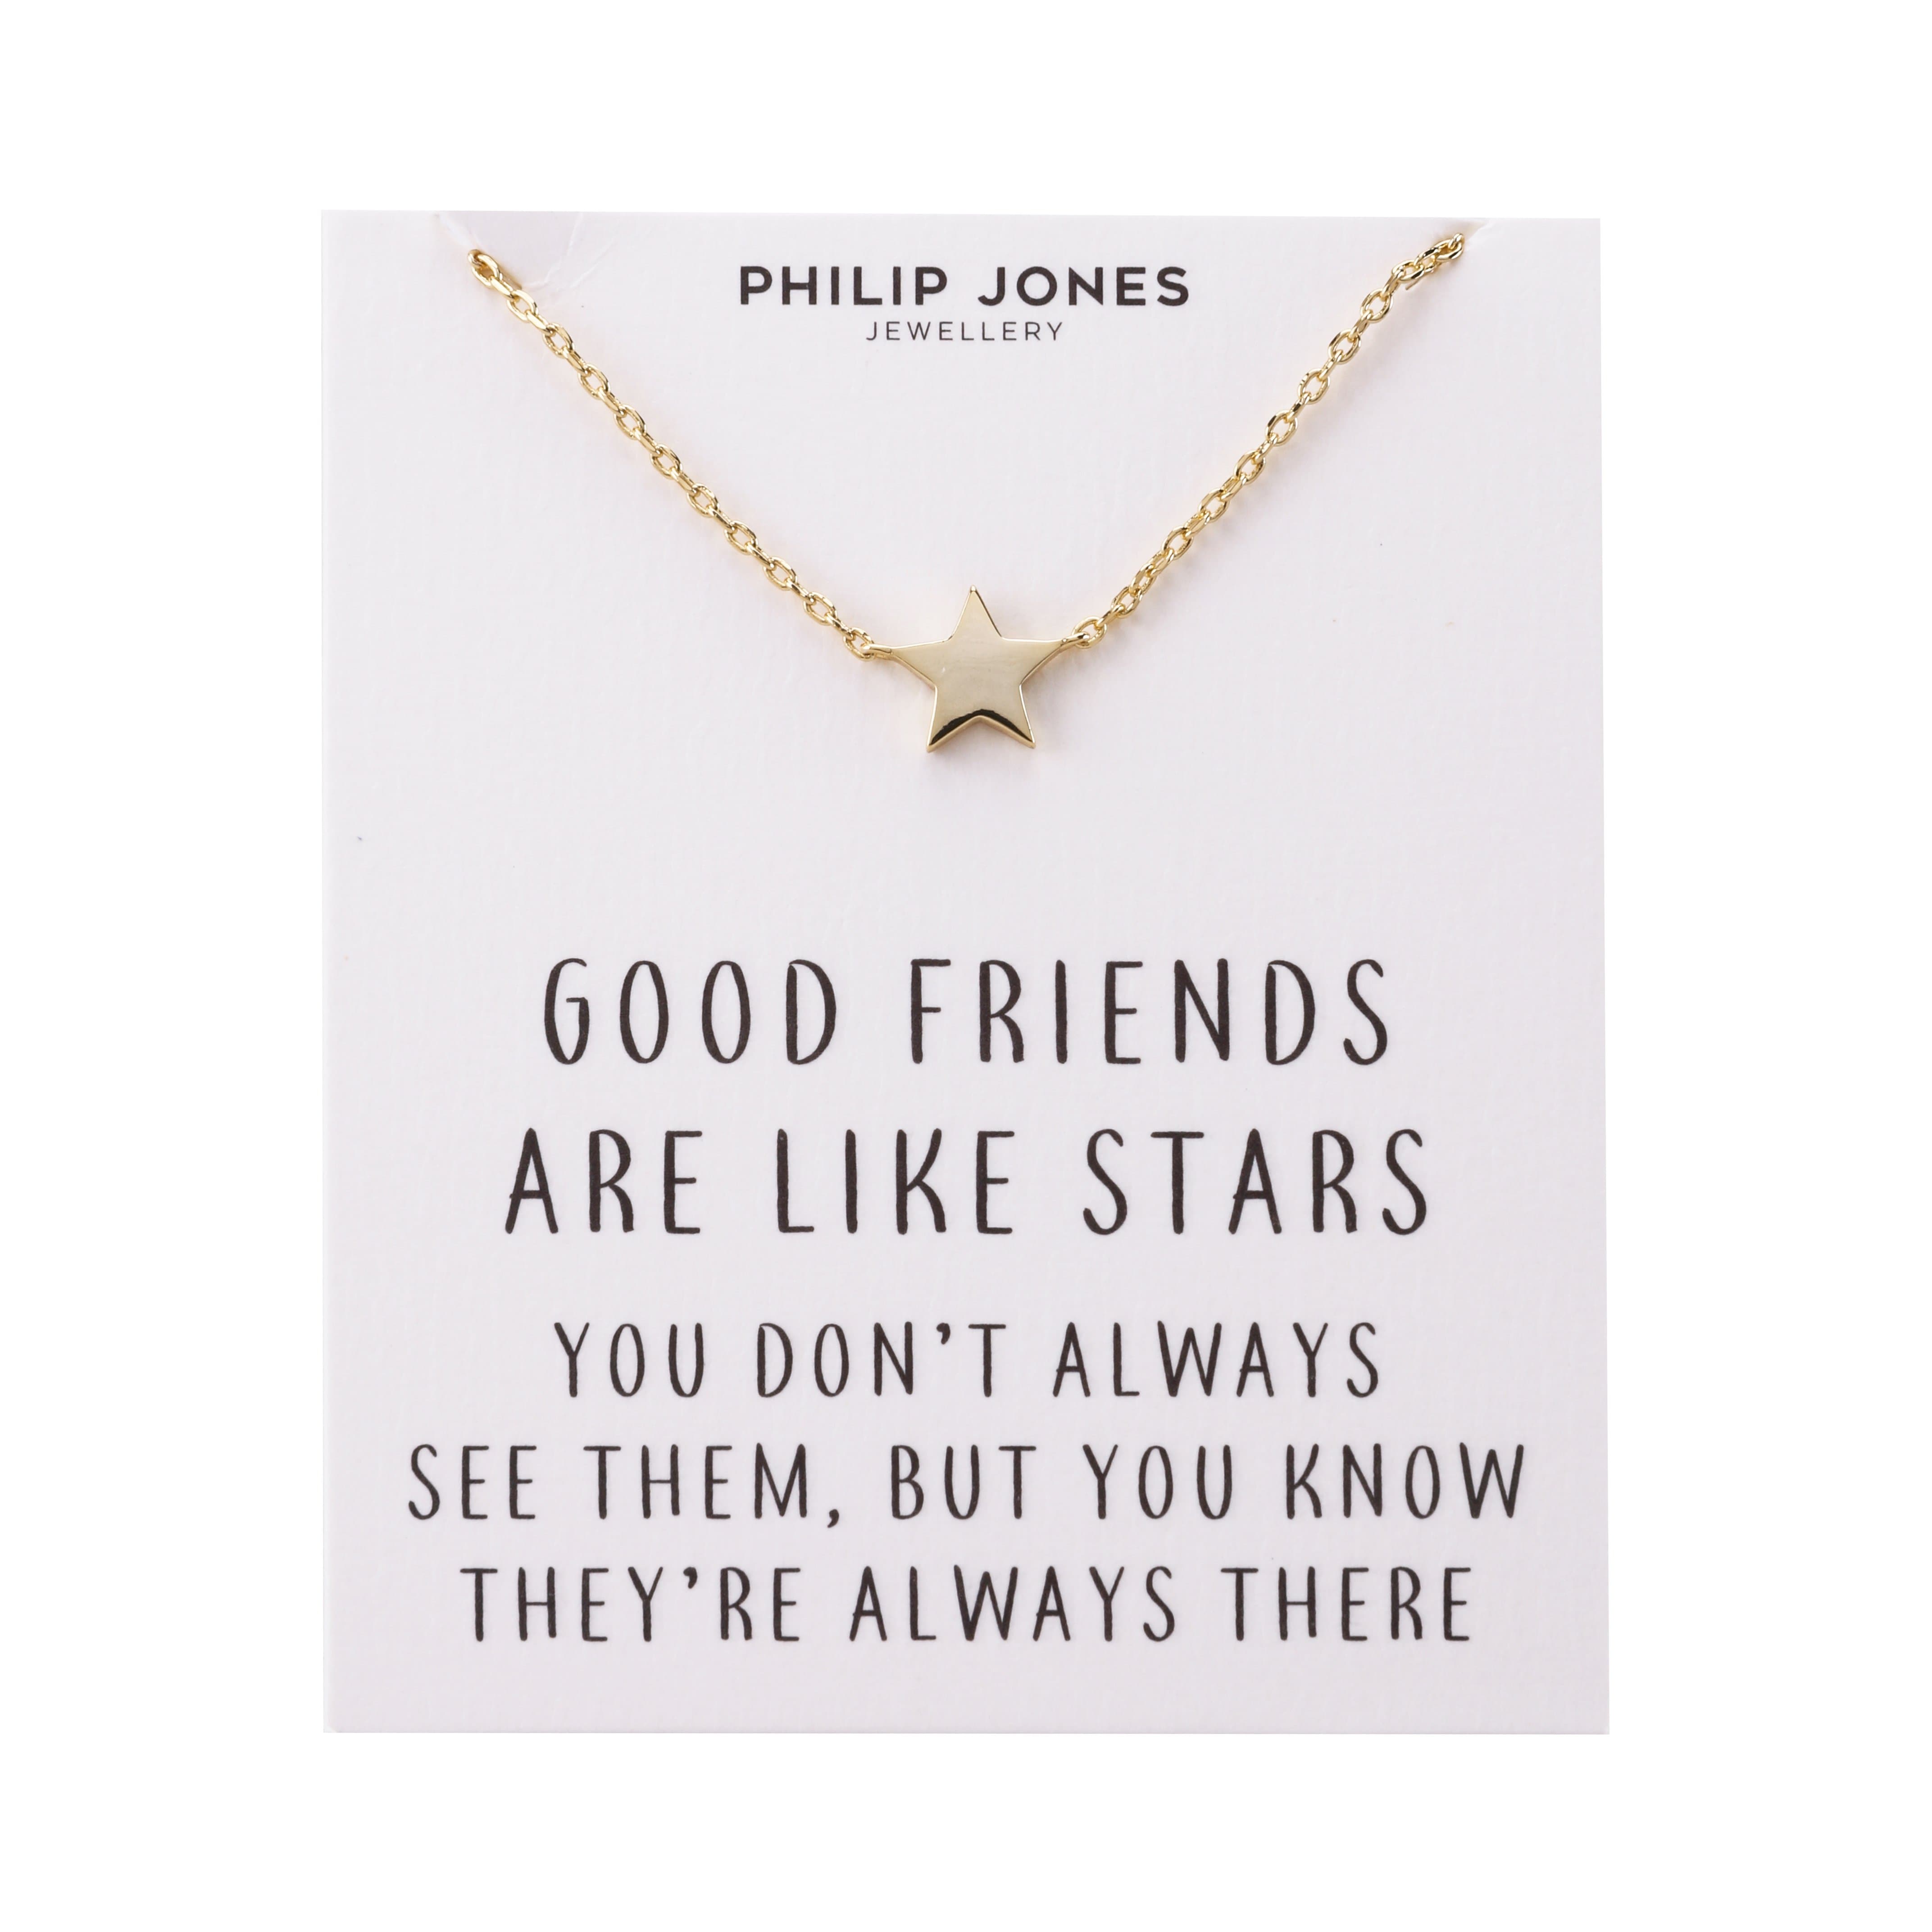 Gold Plated Star Necklace with Quote Card by Philip Jones Jewellery